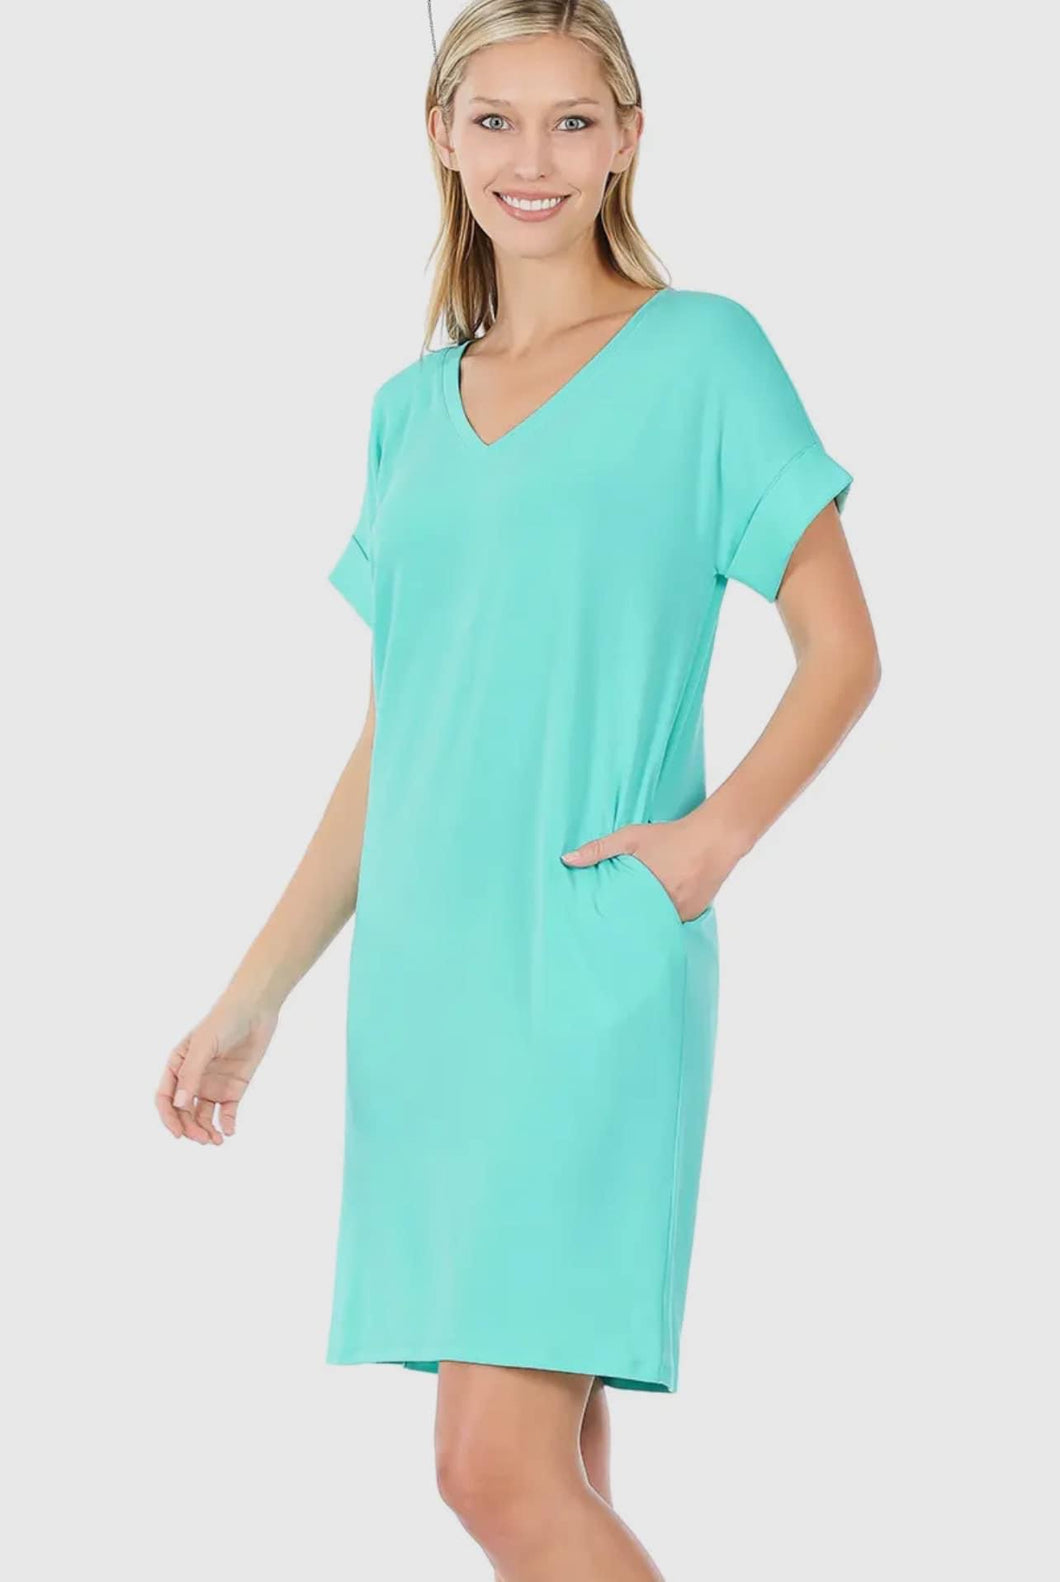 LBBB Teal Dress with Pockets